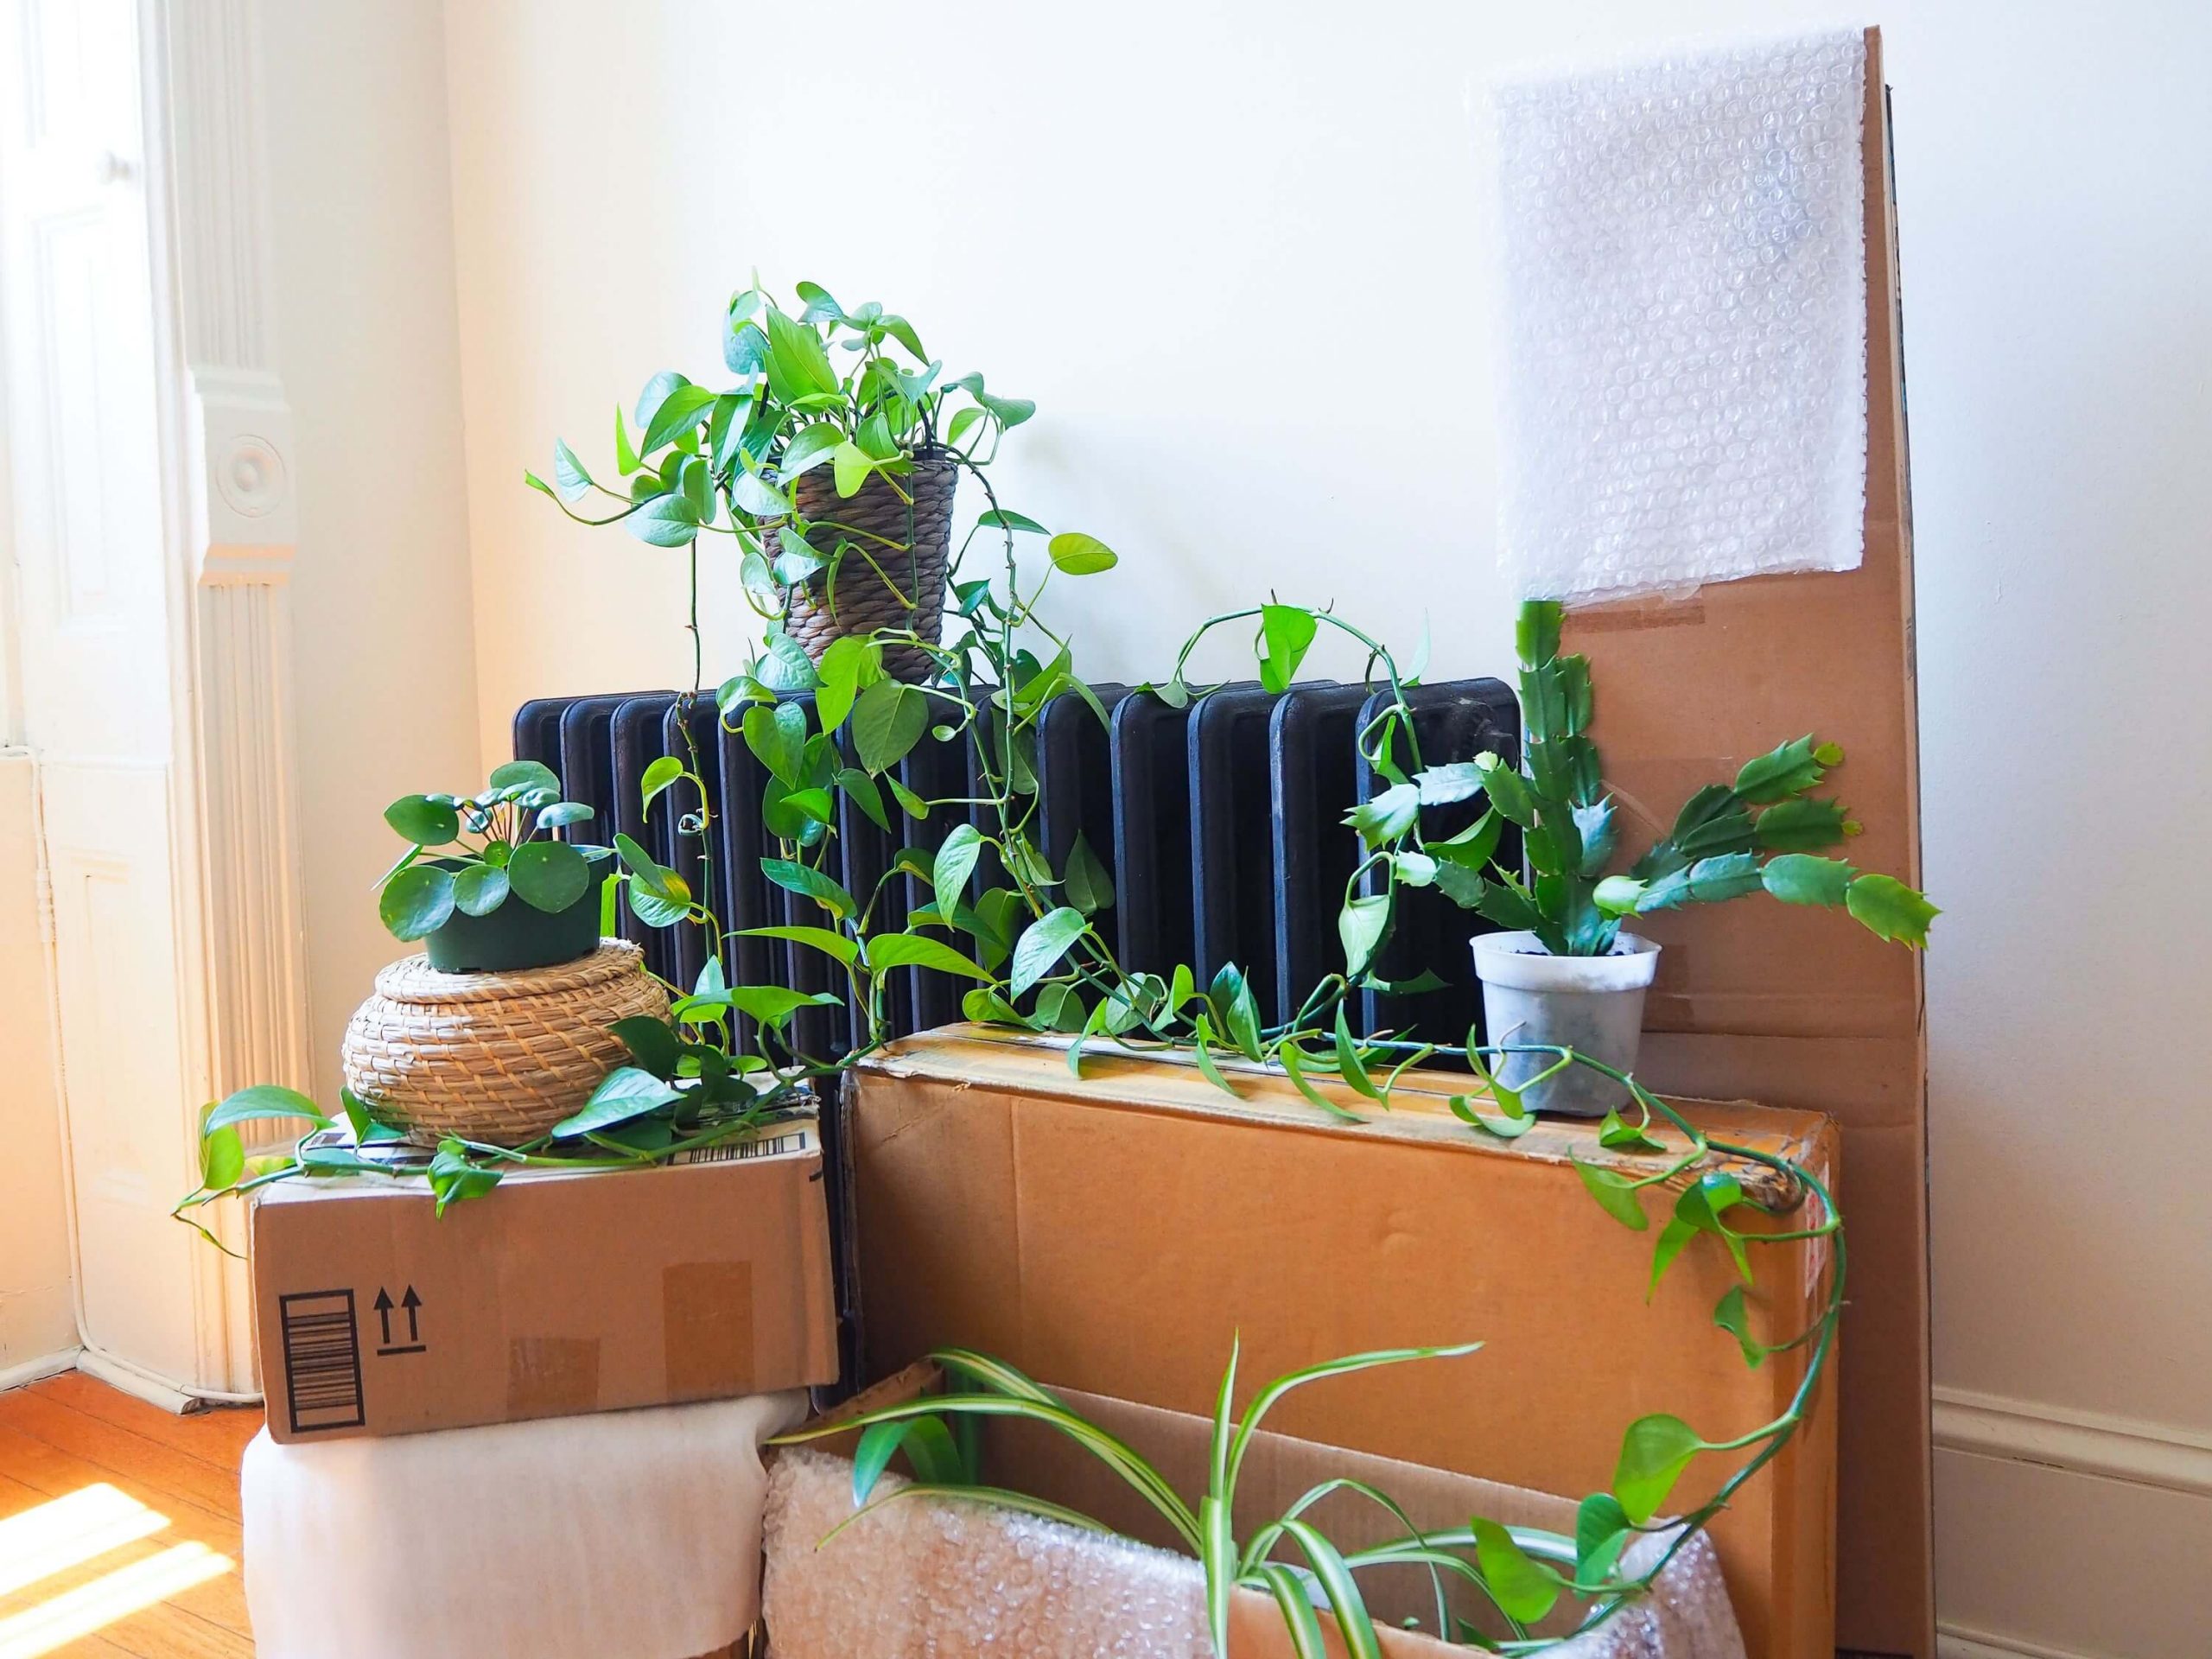 Keeping Plants Alive During a Big Move